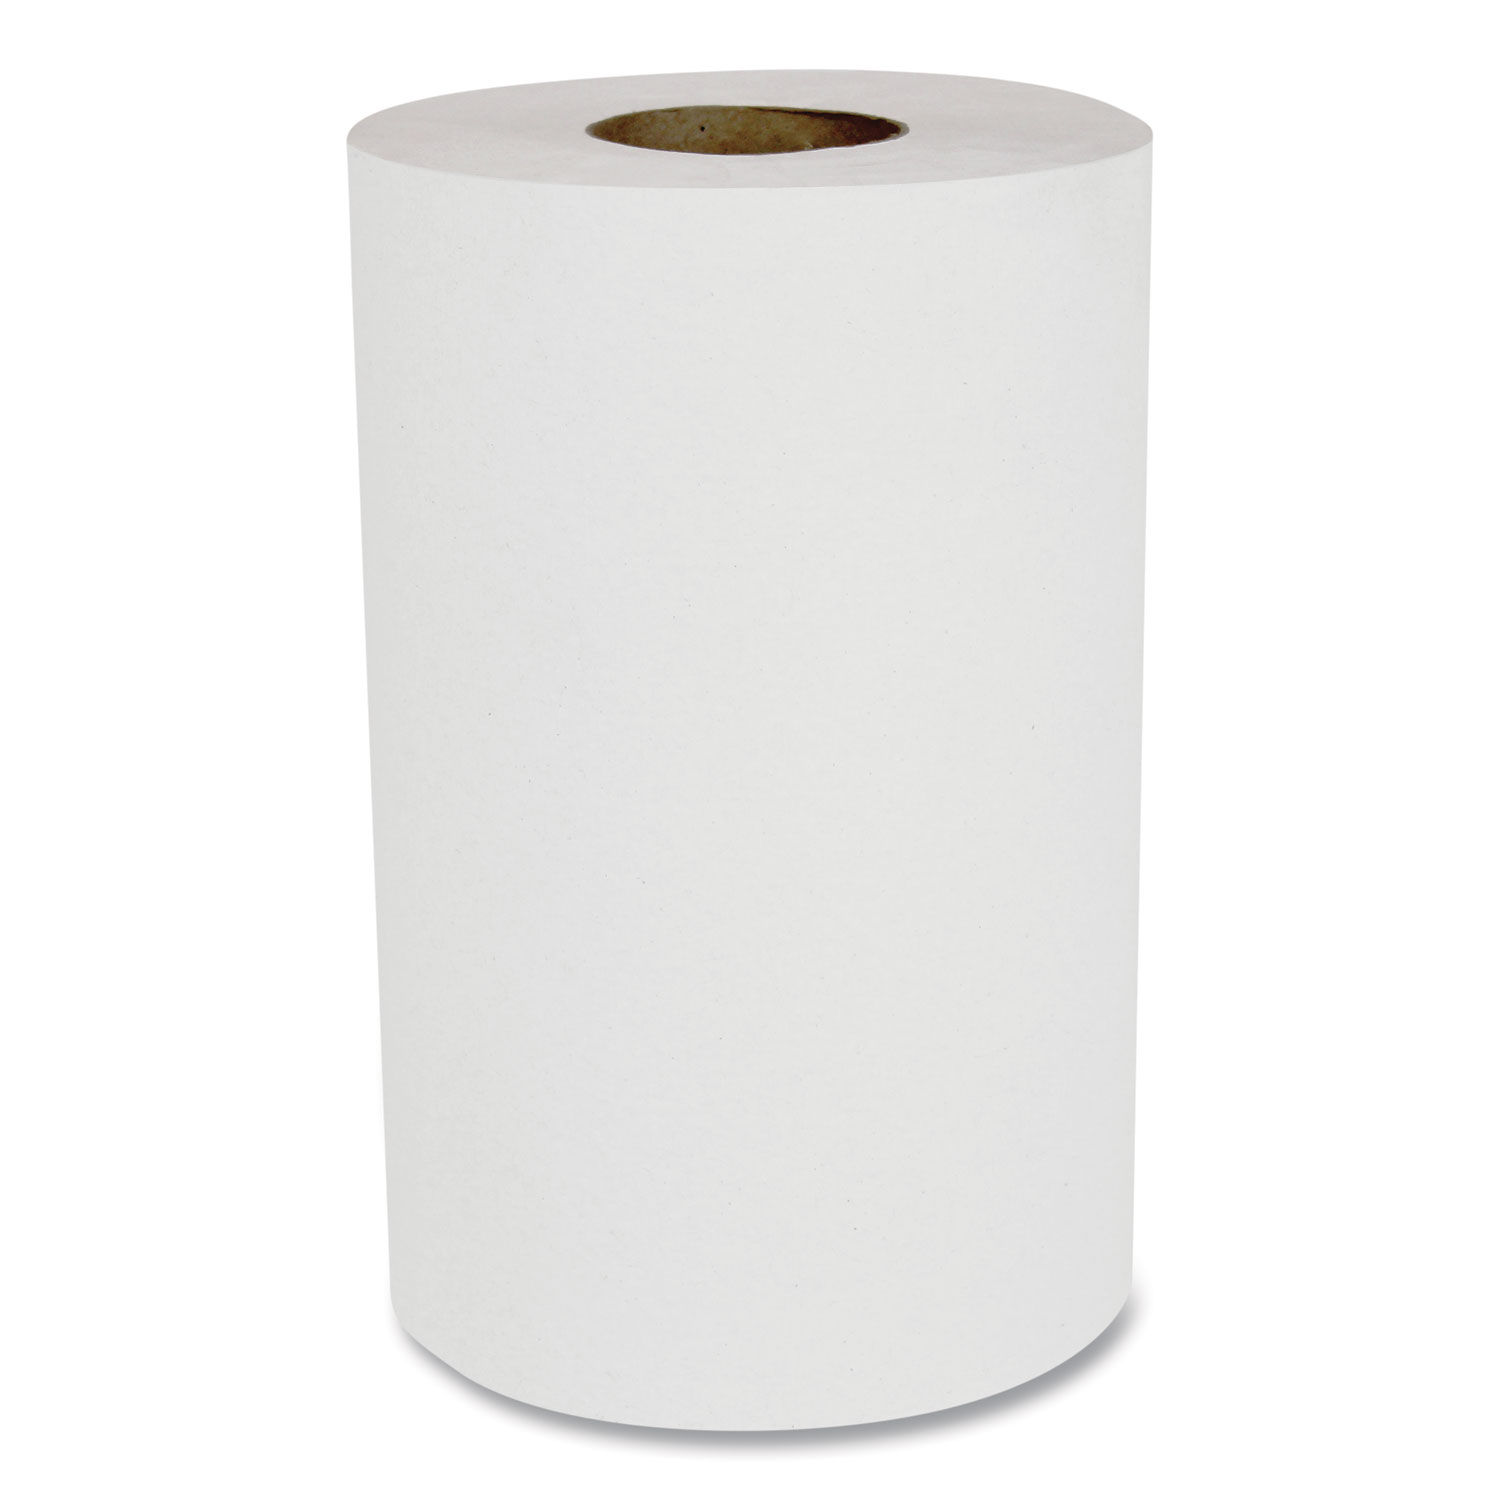 Unperforated Paper Towel Roll, White 8 x 350' Rolls, 12 Rolls/Case -  BWK6250